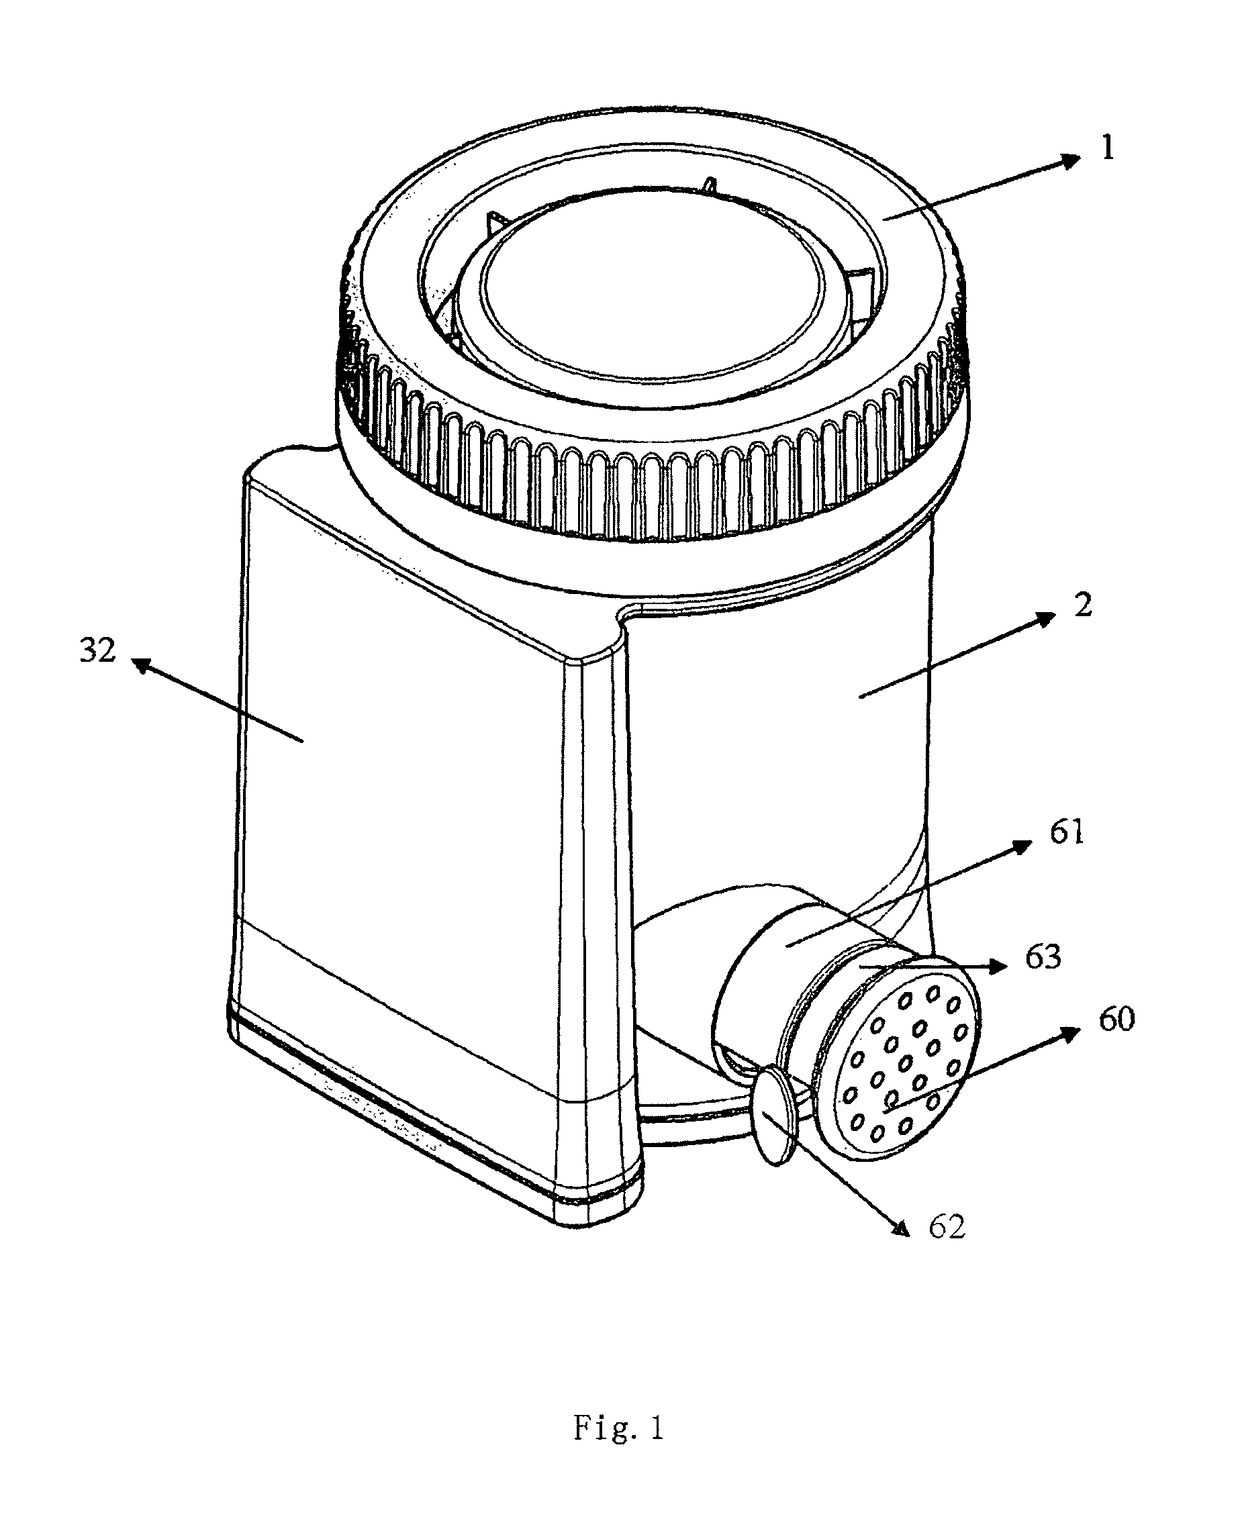 Detection device and method of using the same